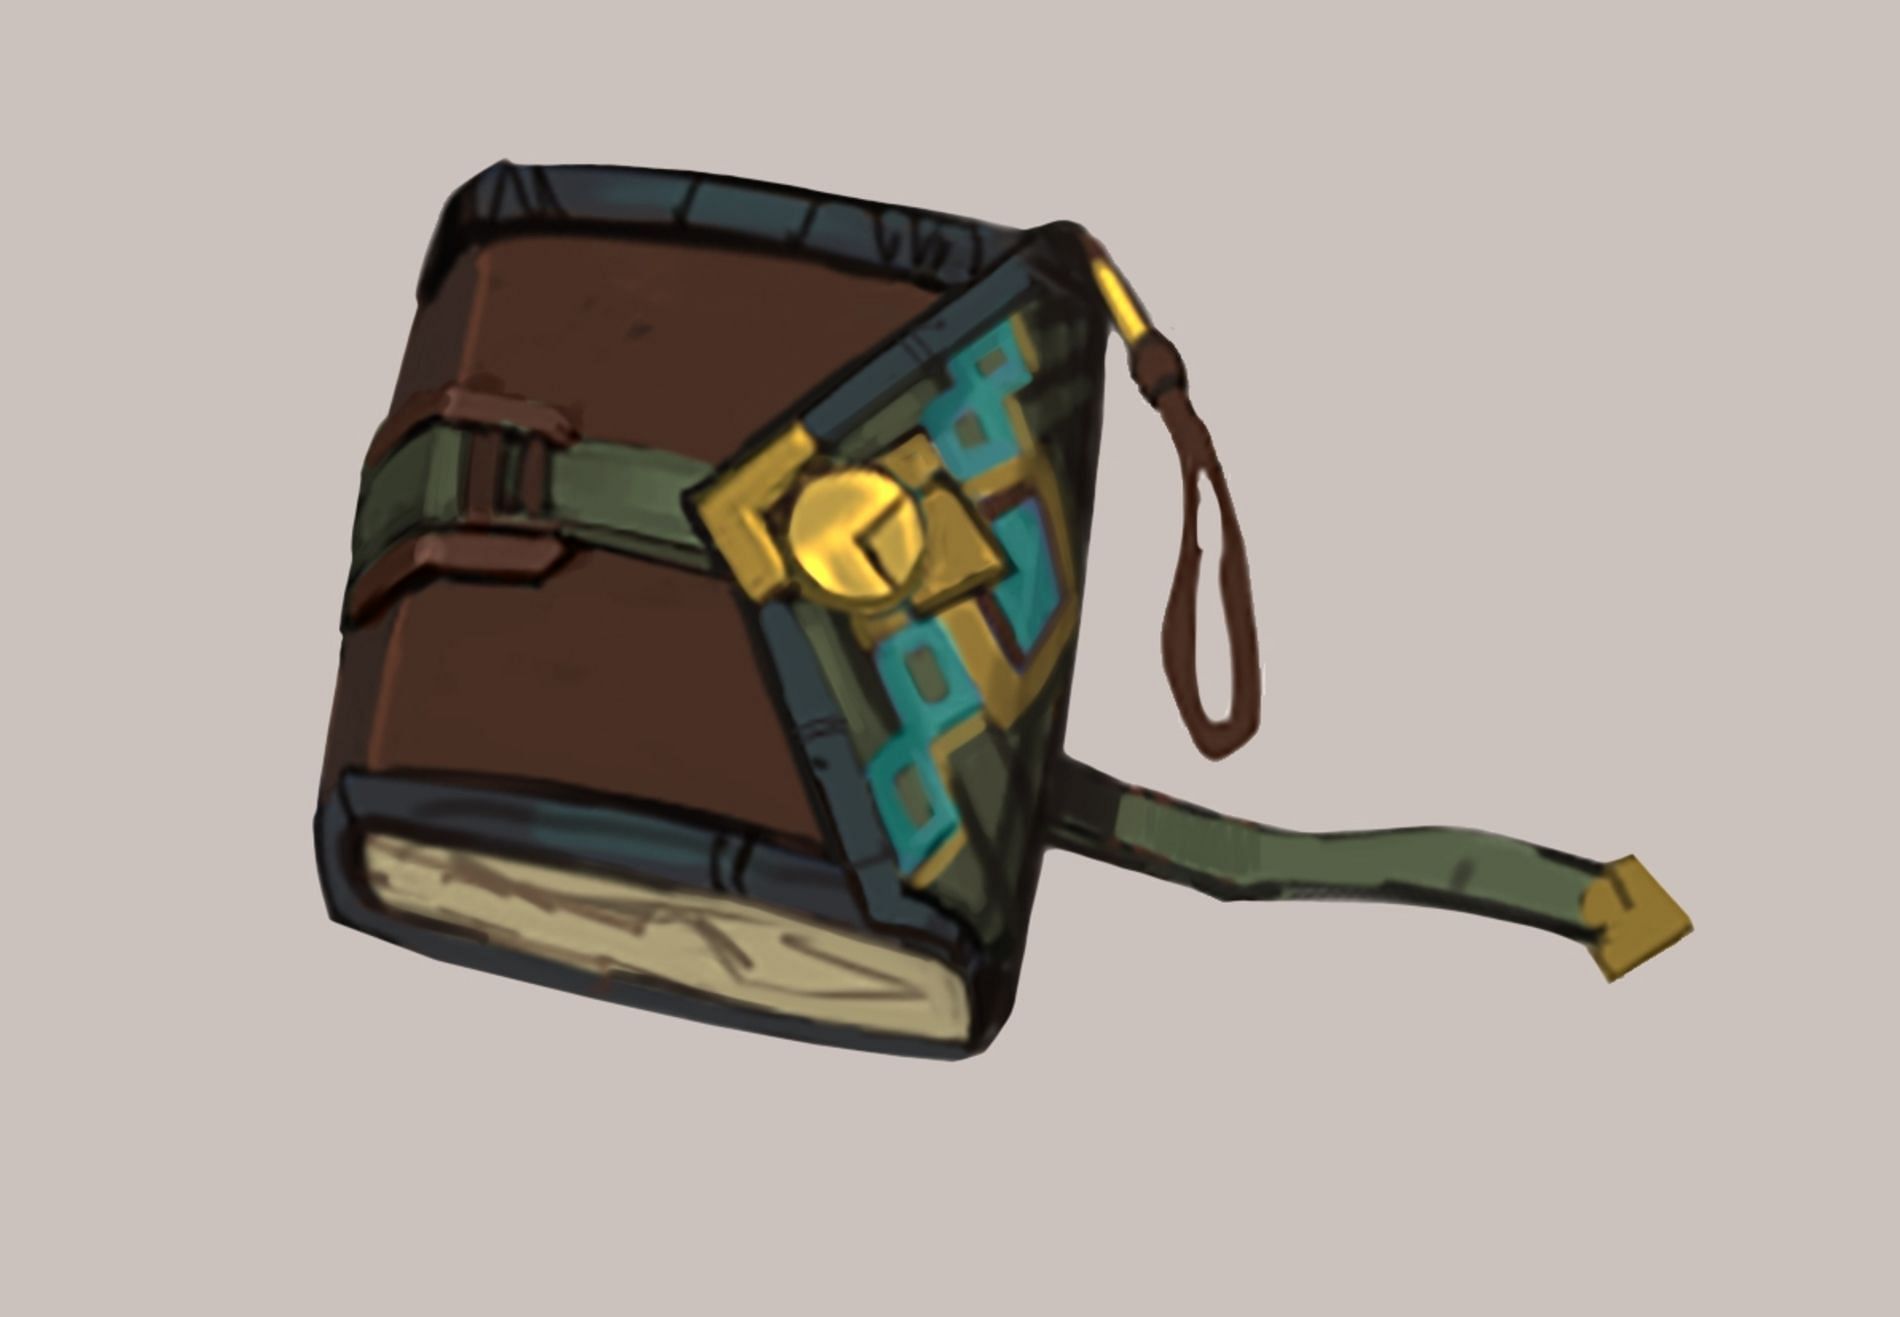 League of Legends&#039; Tope&#039;s journal, whose details are yet to be revealed (Image via Riot Games)